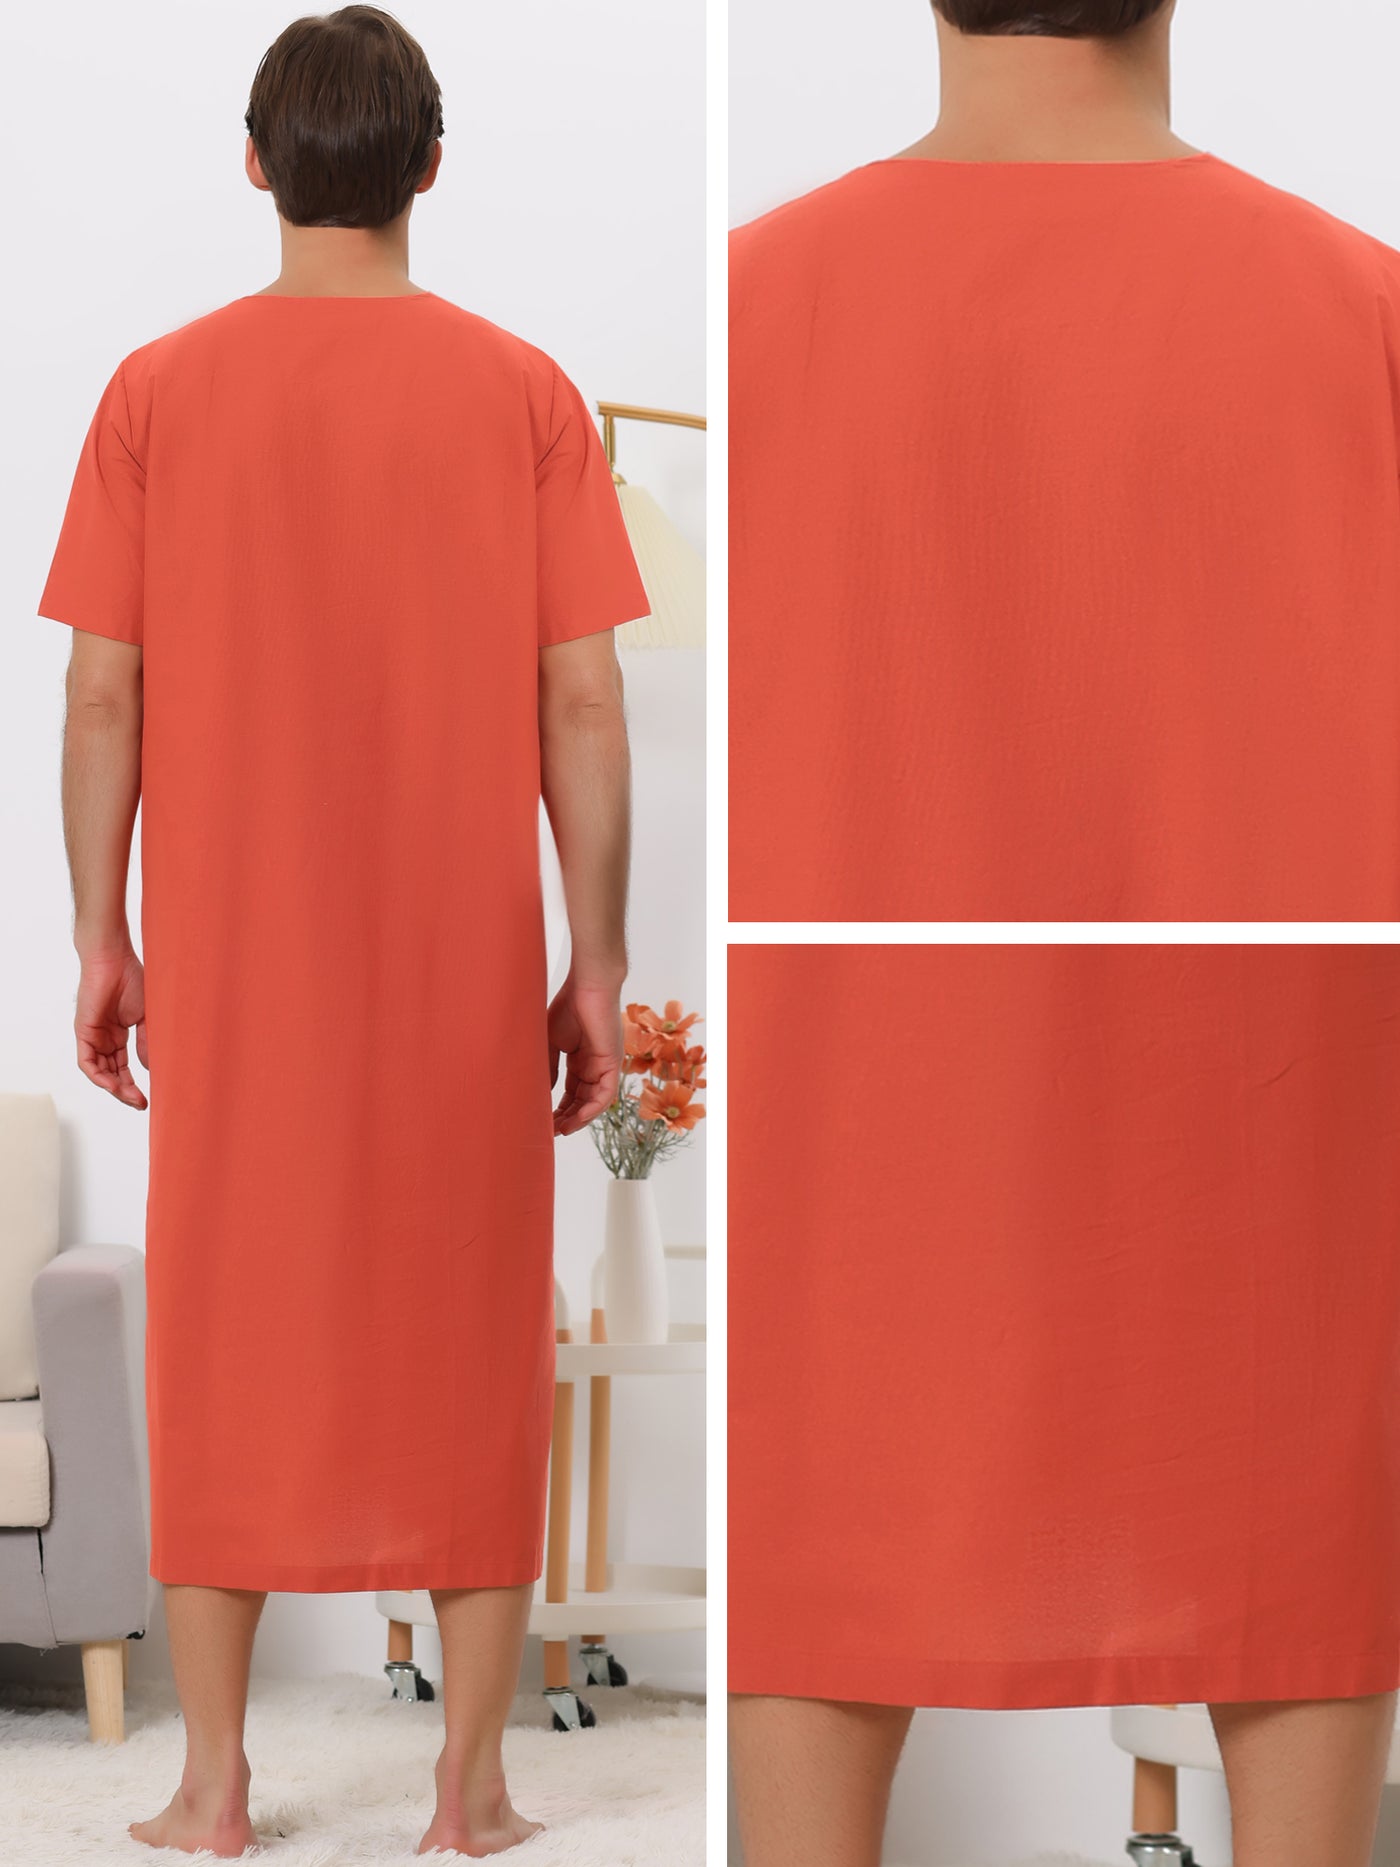 Bublédon Nightgown Short Sleeves Button Closure Contrast Color Long Nightshirts